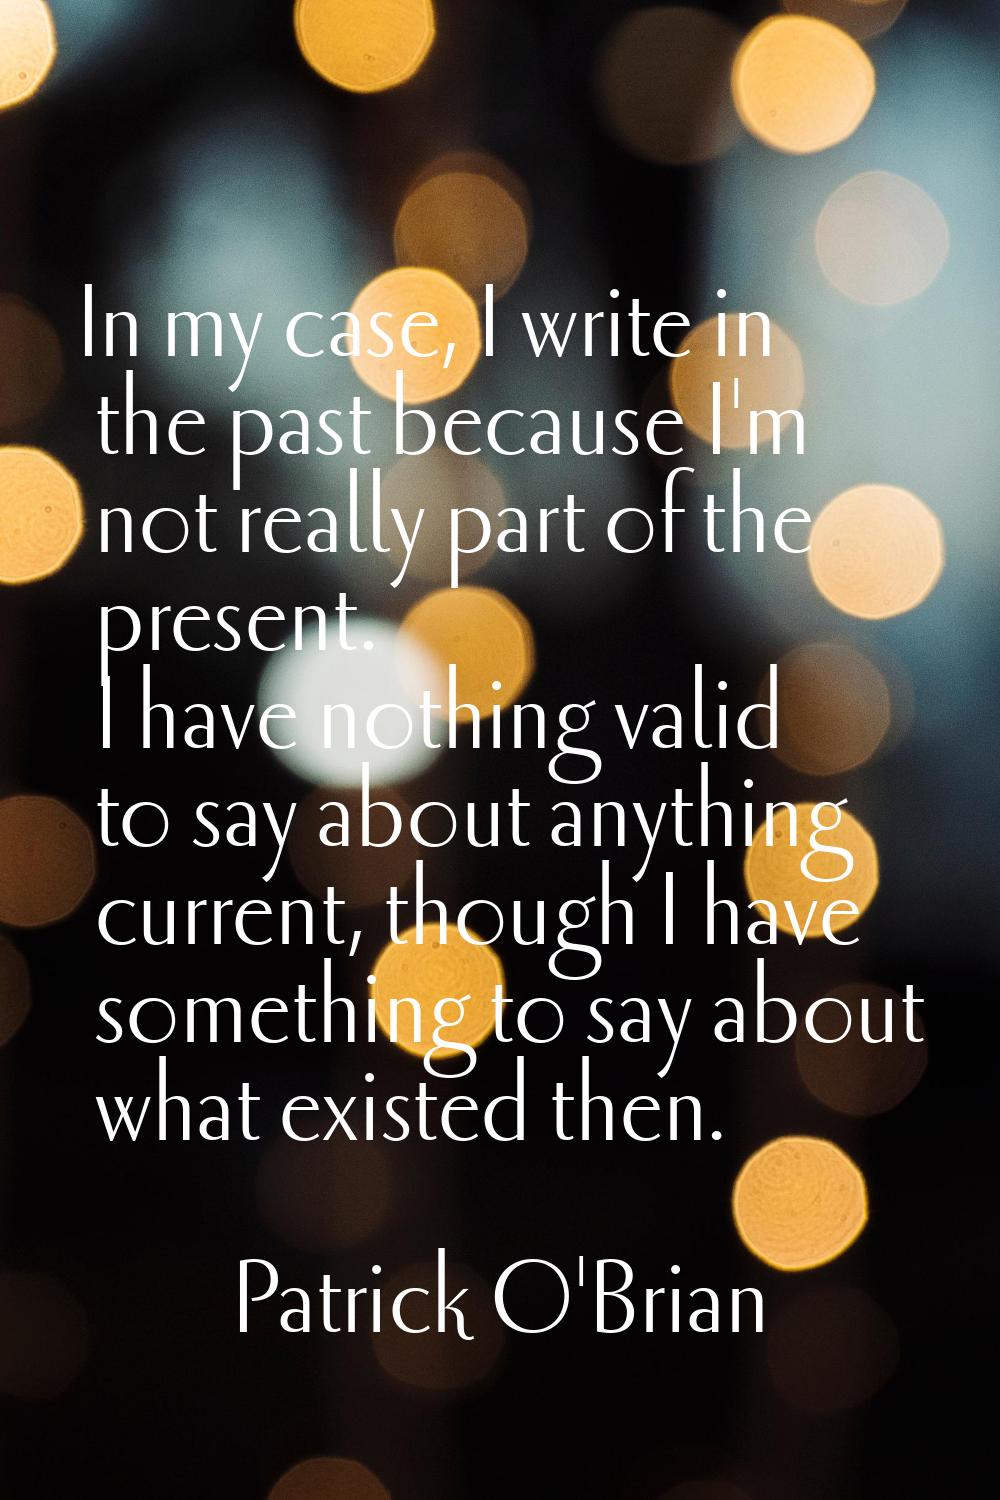 In my case, I write in the past because I'm not really part of the present. I have nothing valid to